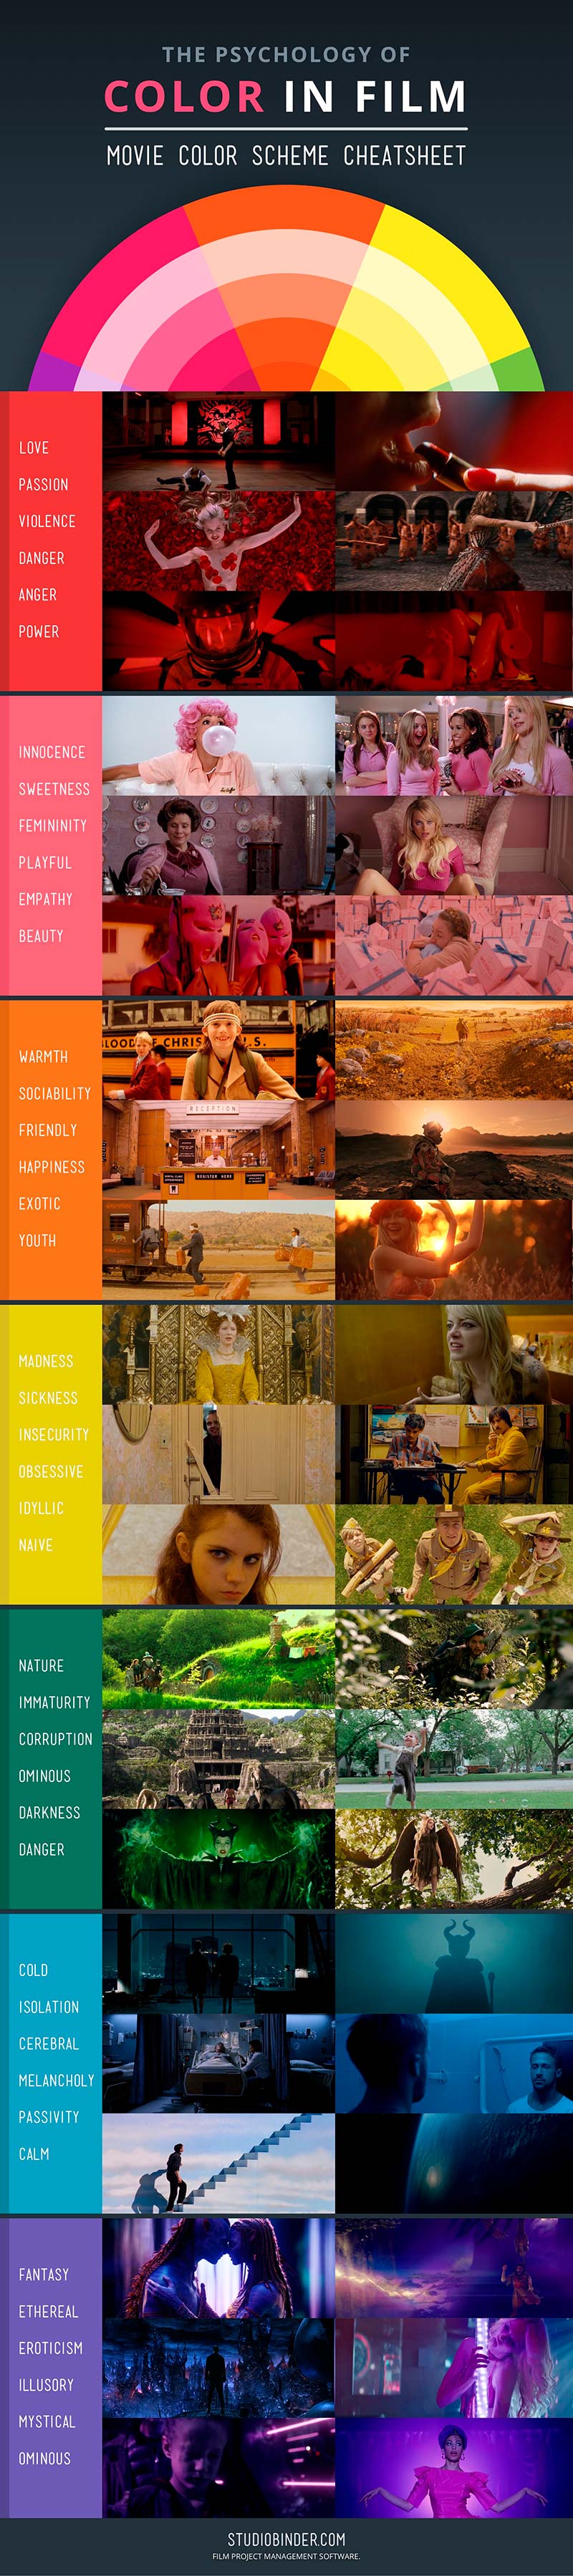 The Psychology of Color in Film 